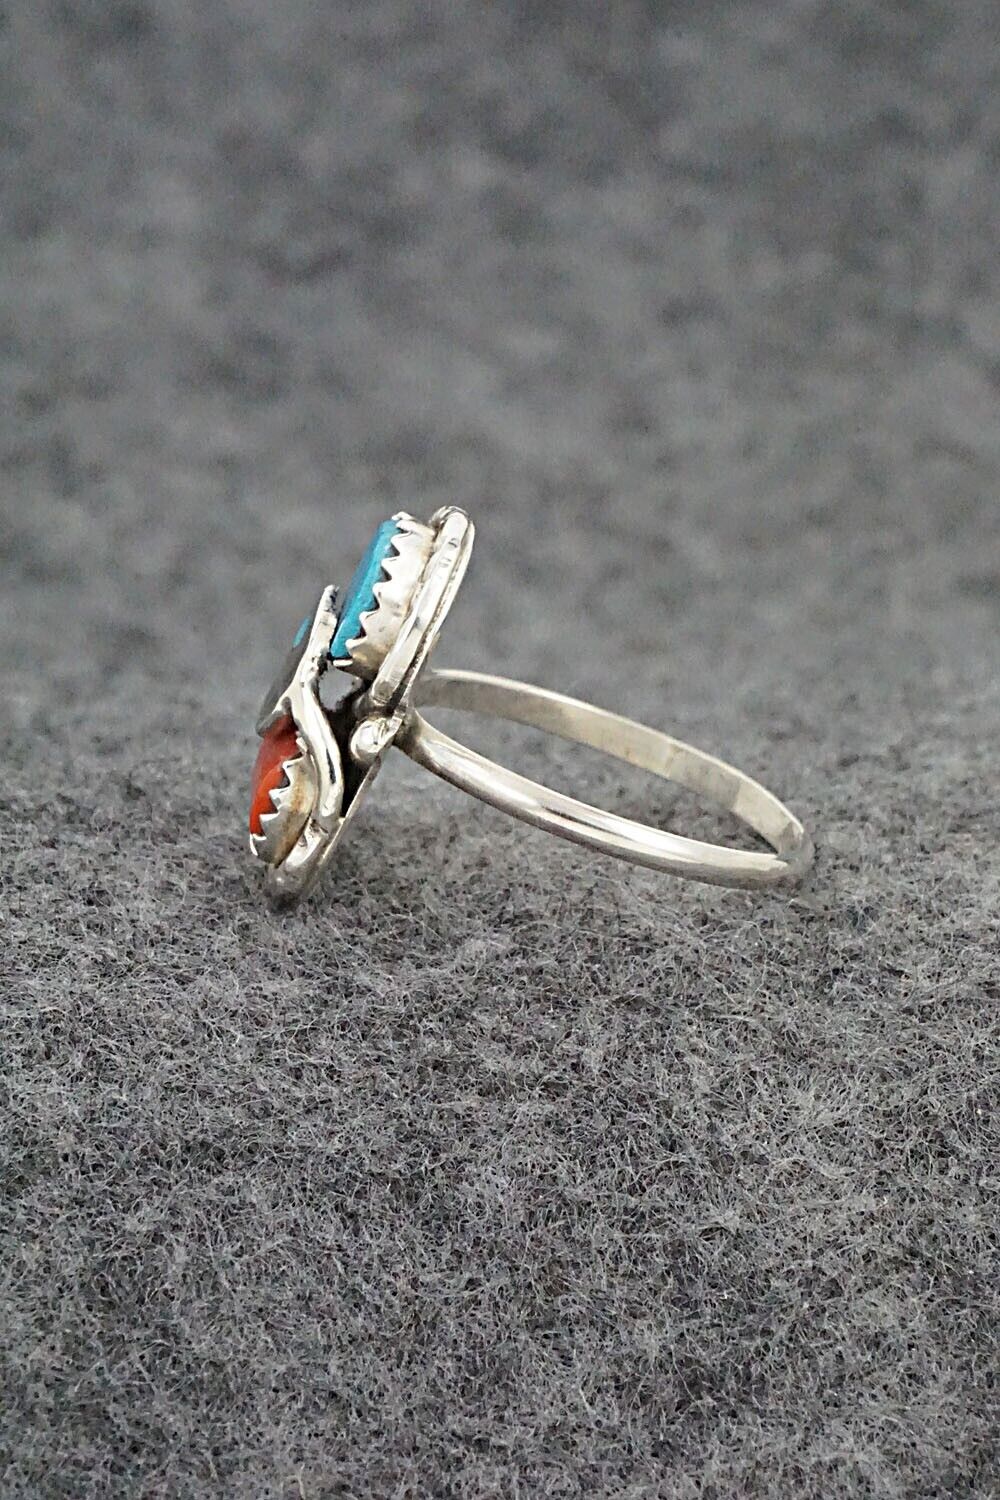 Turquoise, Coral & Sterling Silver Ring - Joy Calavaza - Size 8